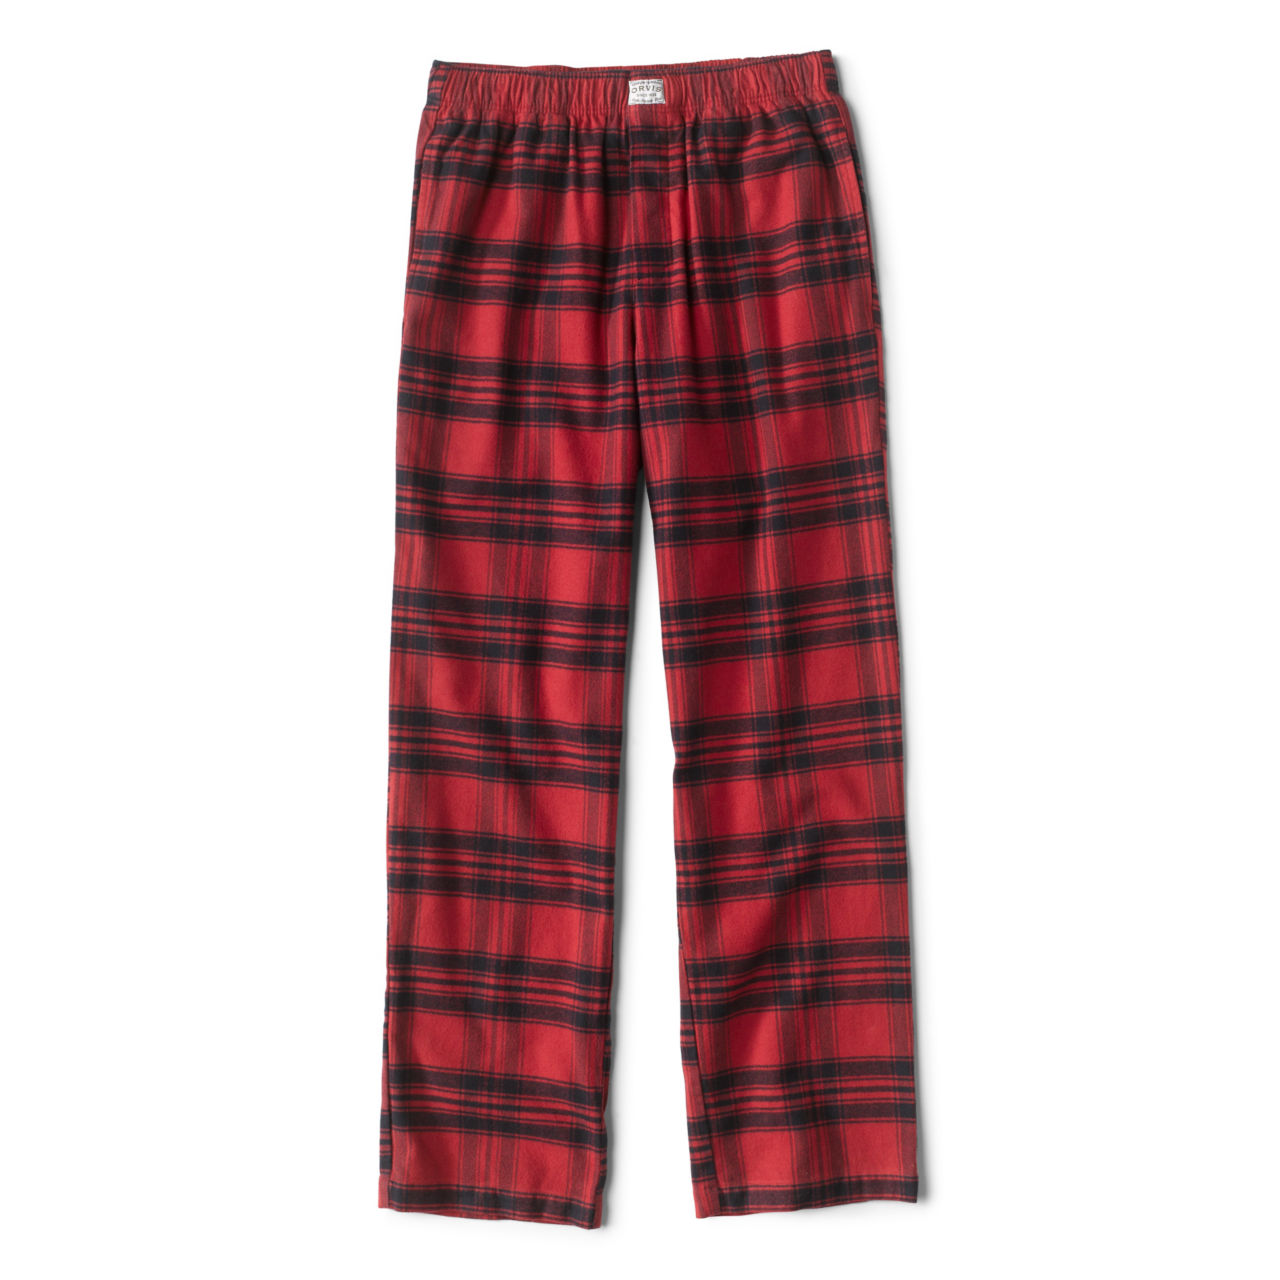 Perfect Flannel Pajama Bottoms